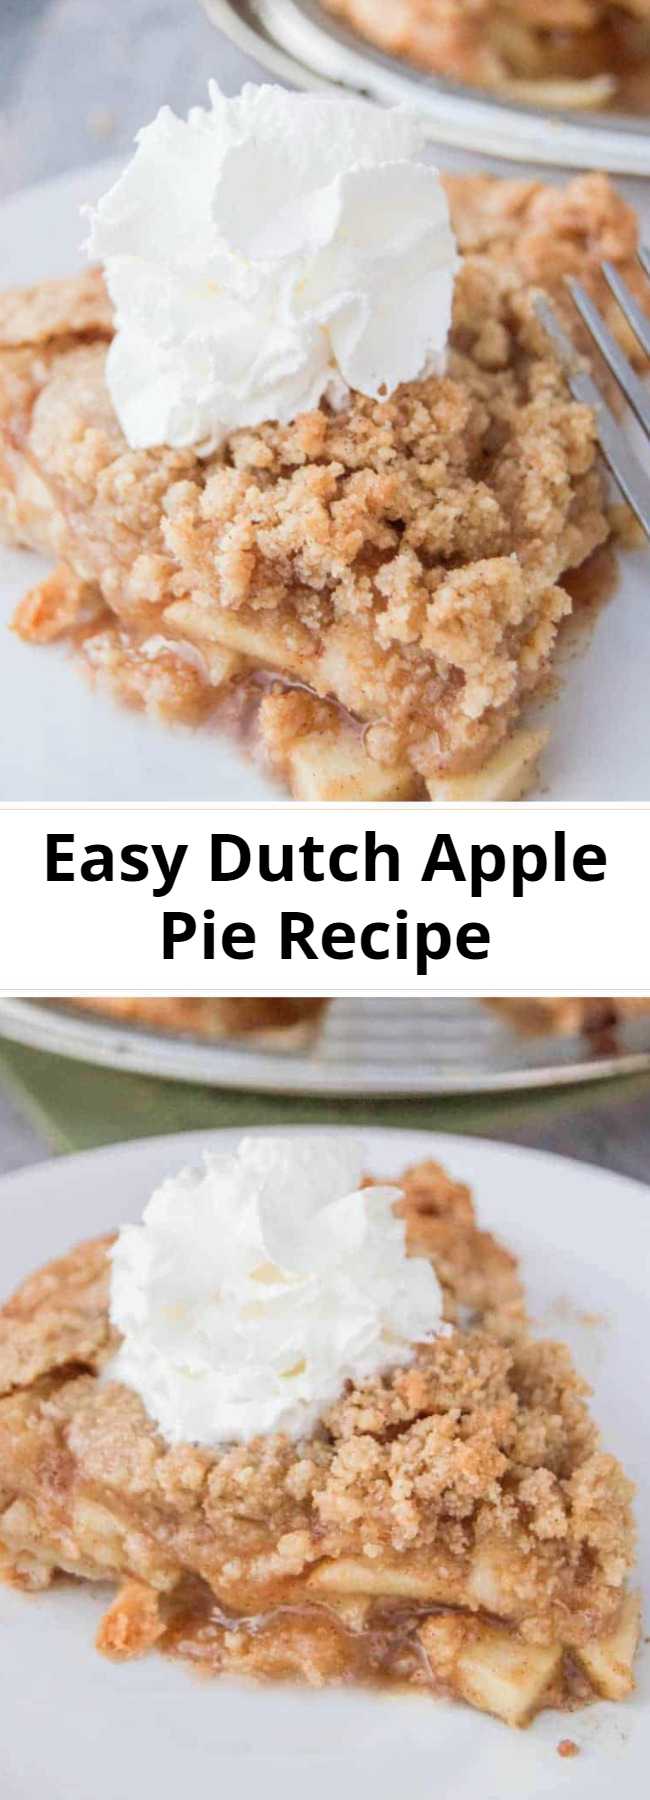 Easy Dutch Apple Pie Recipe - Dutch Apple Pie is one of my all time favorites. Something about warm apples, brown sugar, and whipped cream that make the perfect combination. This pie has rave reviews and is loved by everyone. You need to make sure that you pin this one for the holidays!!